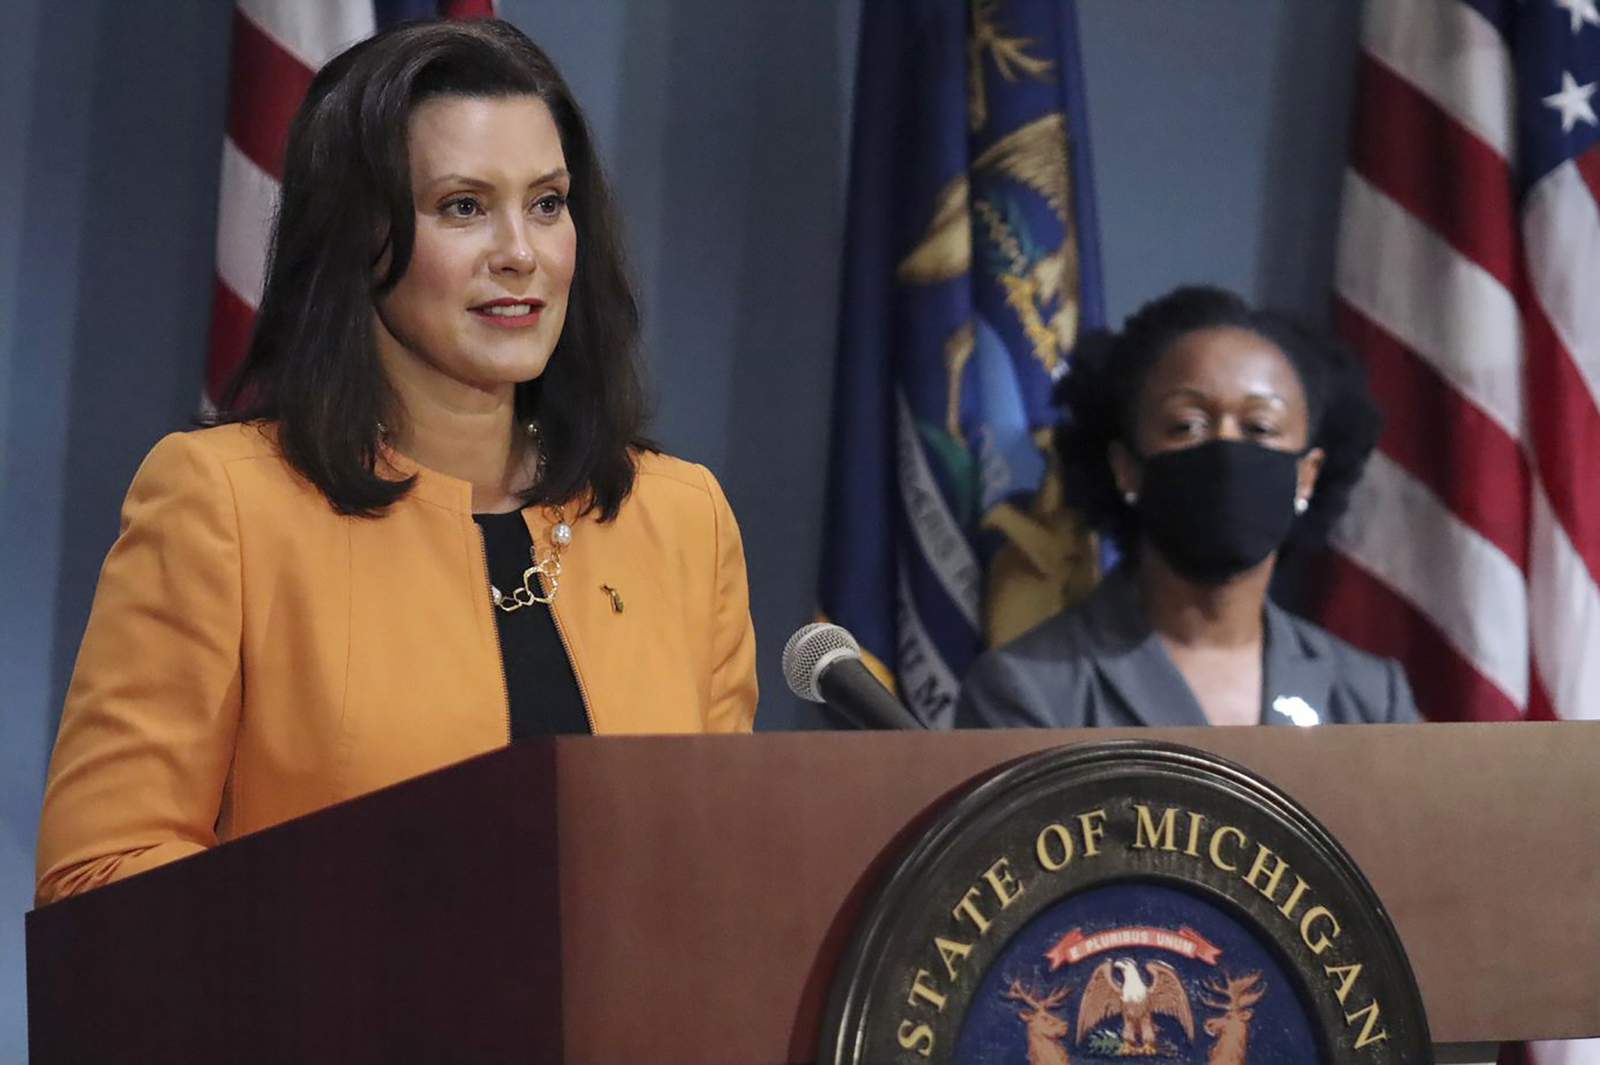 More COVID-19 orders will be issued for Michigan in ‘coming hours and days,’ Gov. Whitmer believes